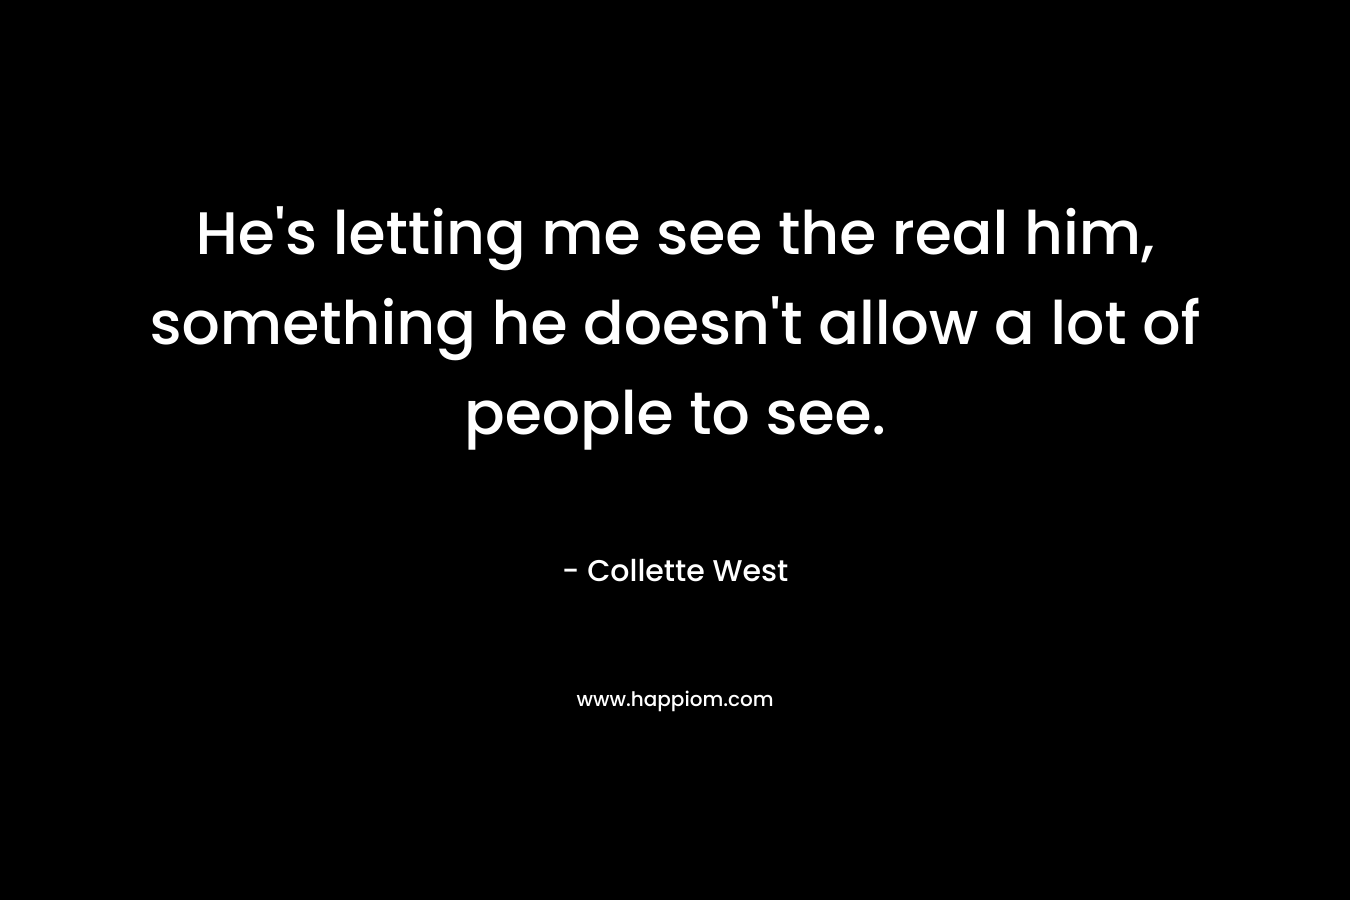 He’s letting me see the real him, something he doesn’t allow a lot of people to see. – Collette West